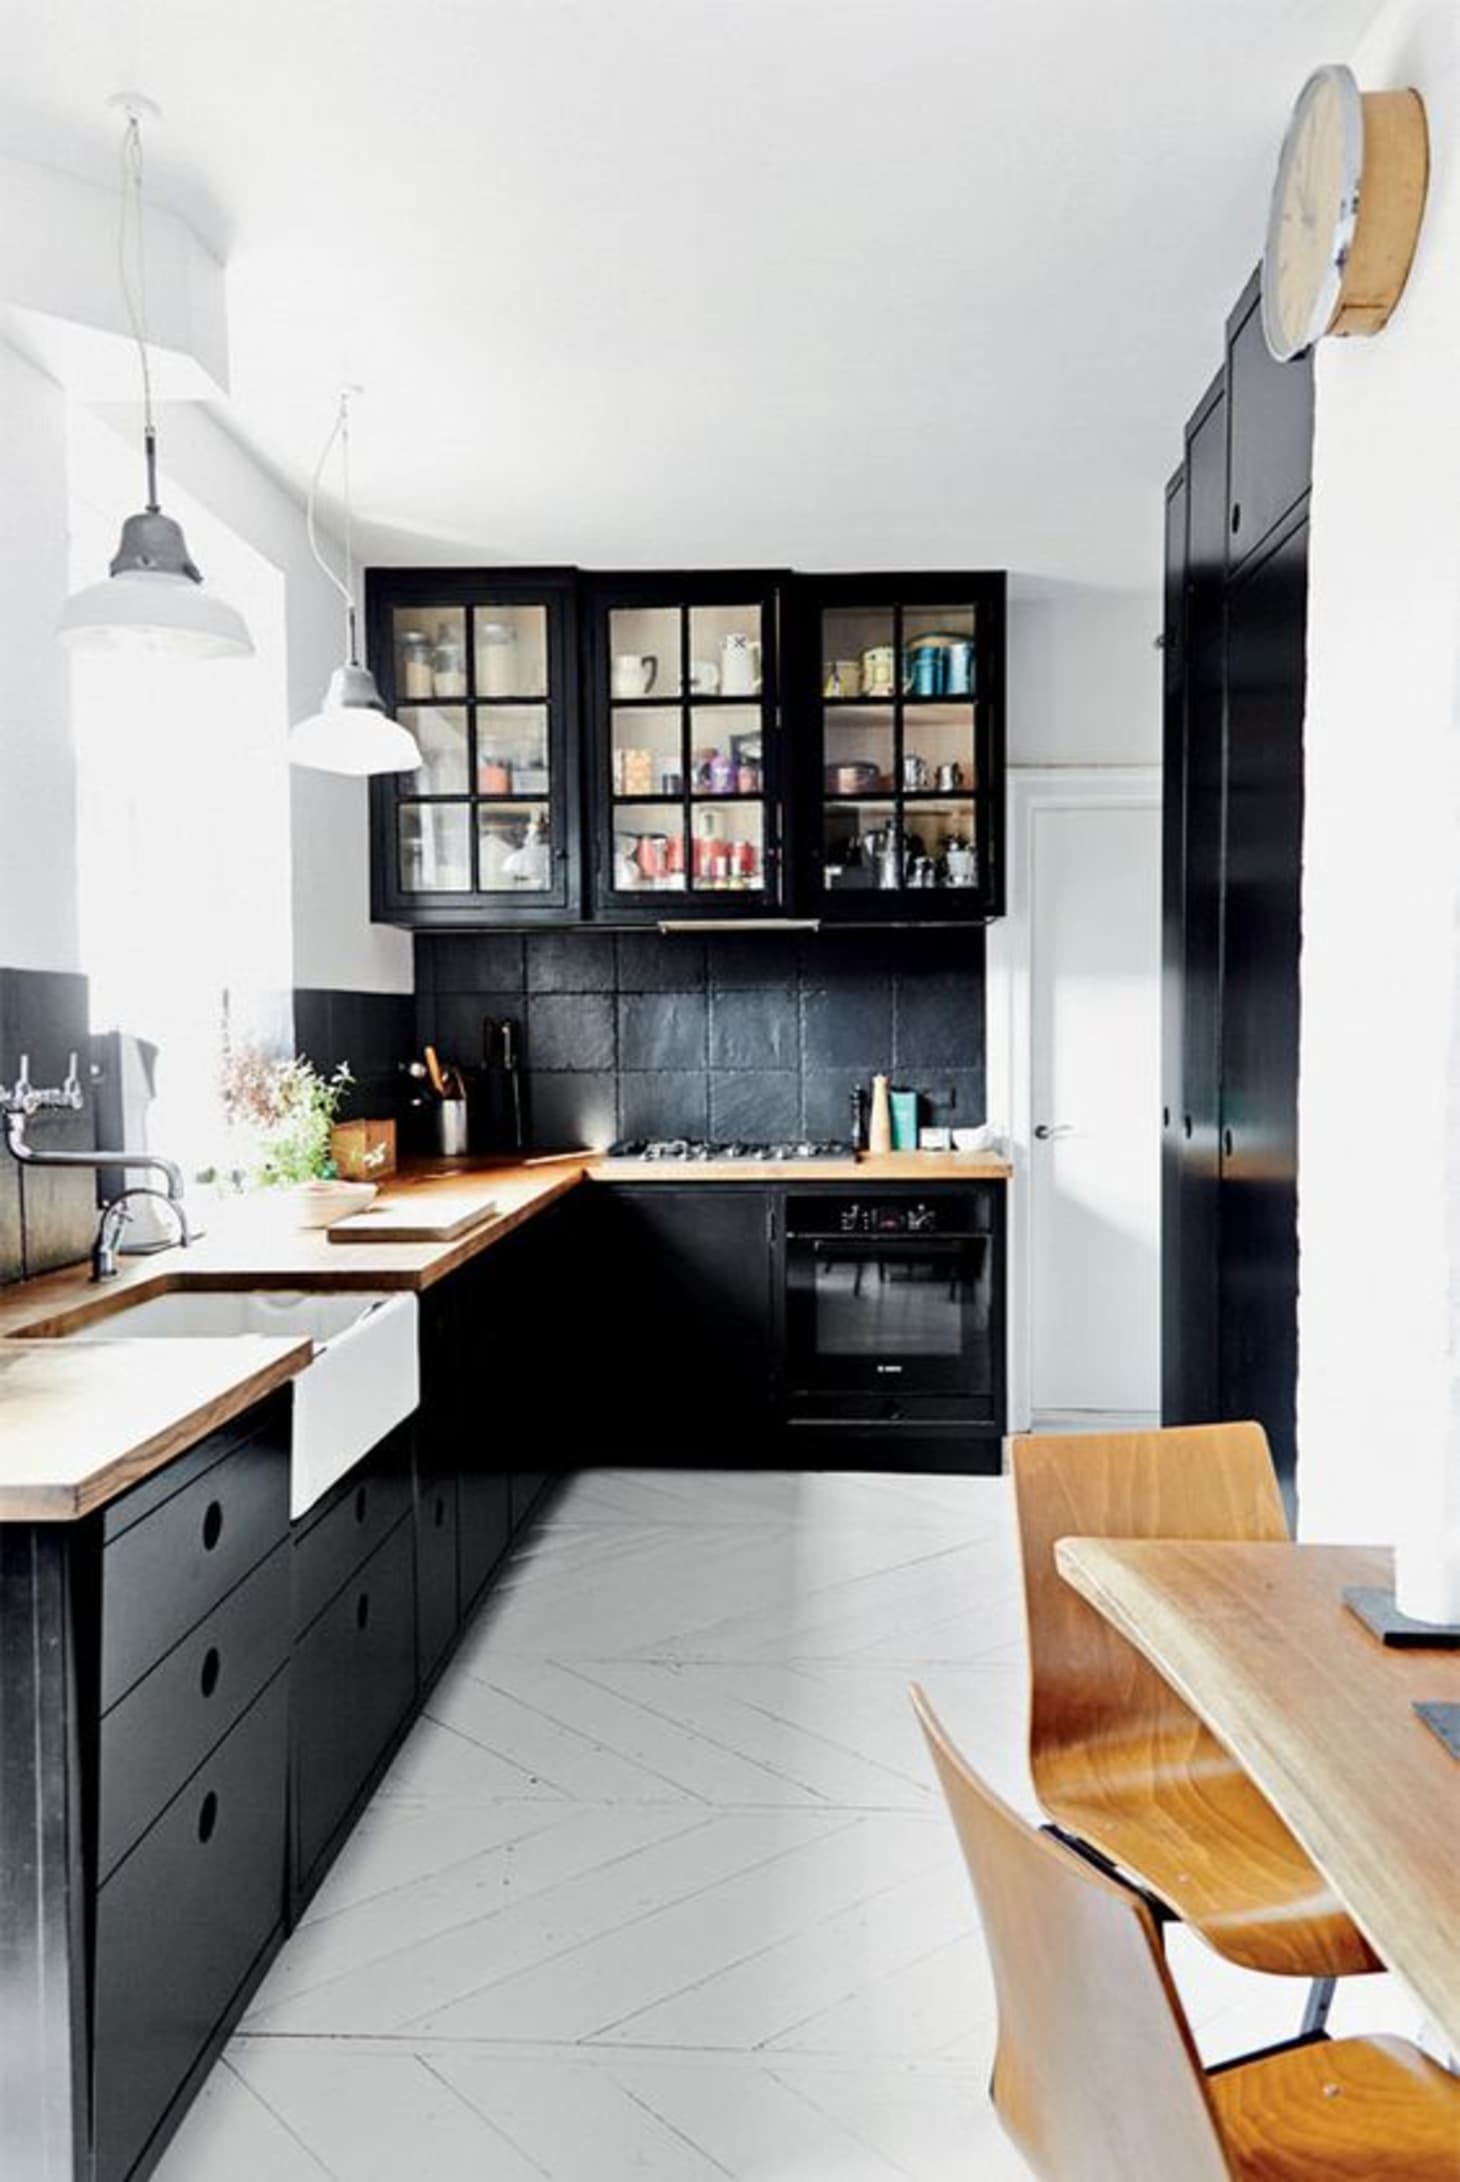 Butcher Block Countertops Are Beauty On A Budget Apartment Therapy